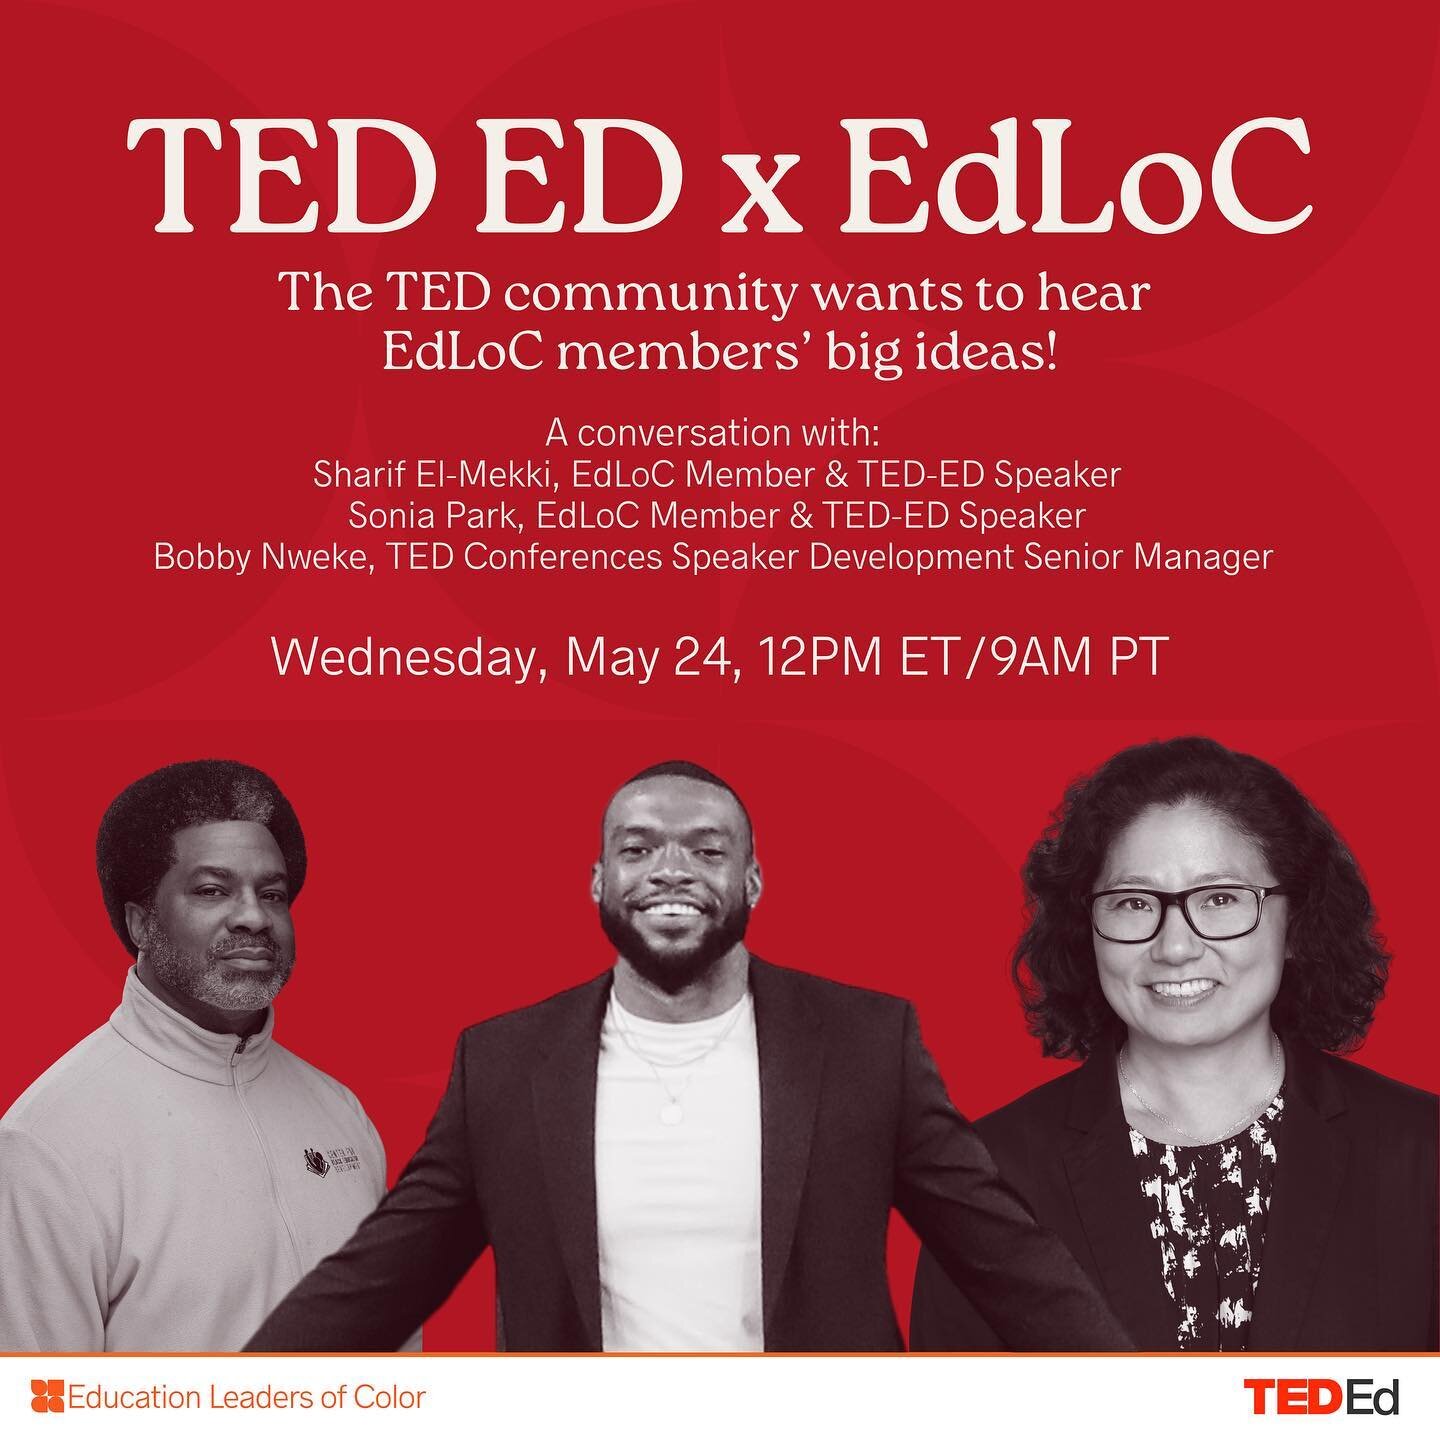 If you've ever considered sharing your idea or passion with others in a TED-style talk, join us for a conversation with Bobby Nweke, who is the Speaker Development Senior Manager for TED conferences, to learn more about opportunities for educators to